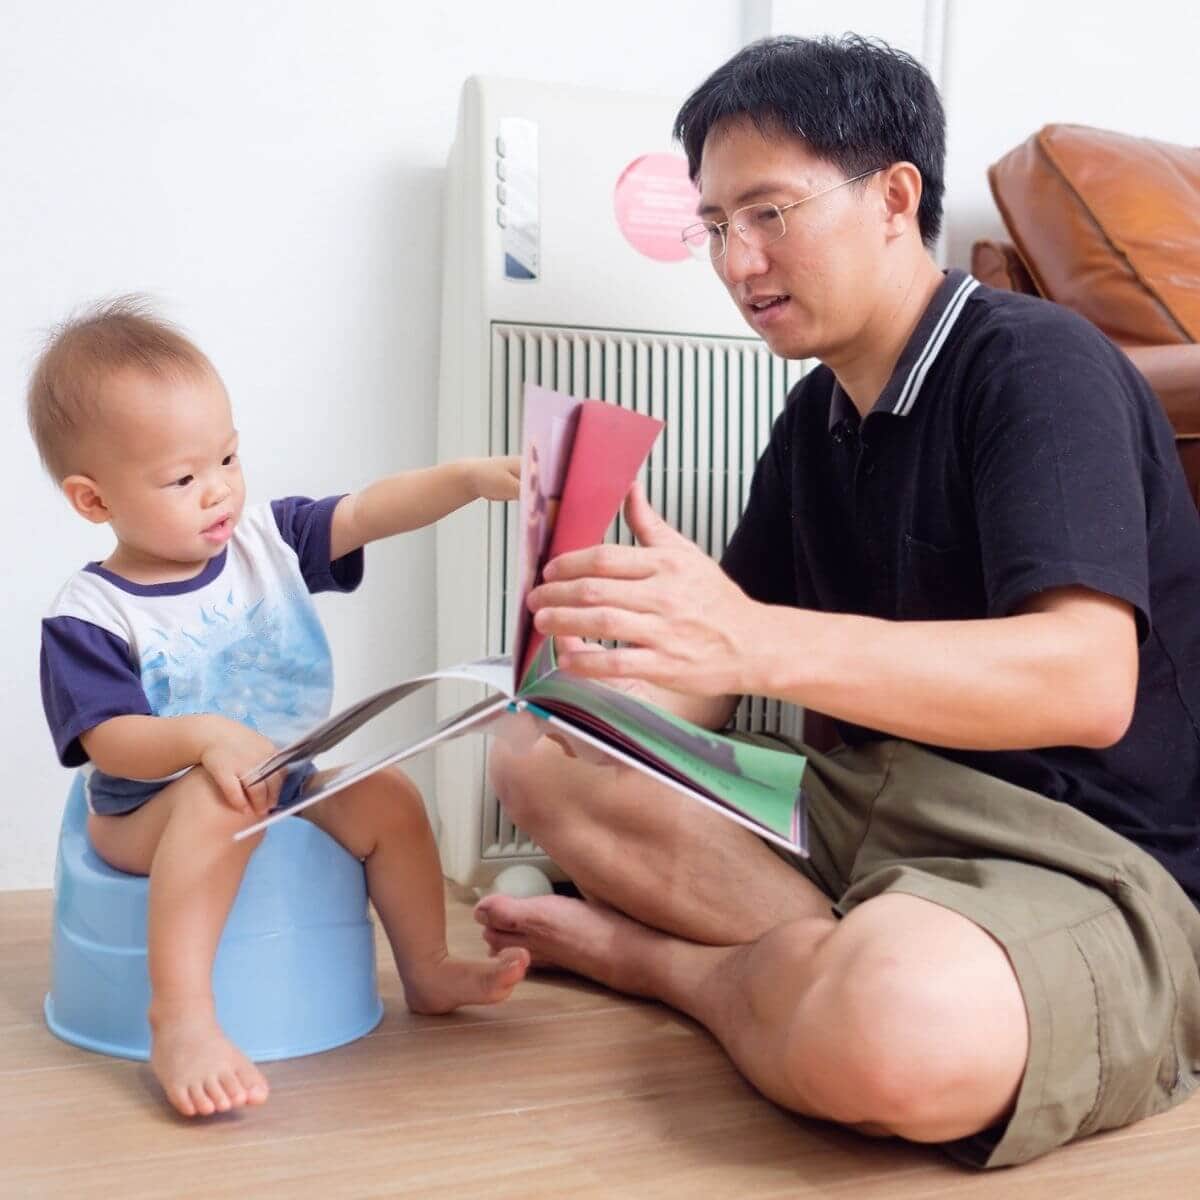 An Asian American dad sits on a wood floor with a book in his hand while his son is sitting on a light blue potty pointing to something in the book.